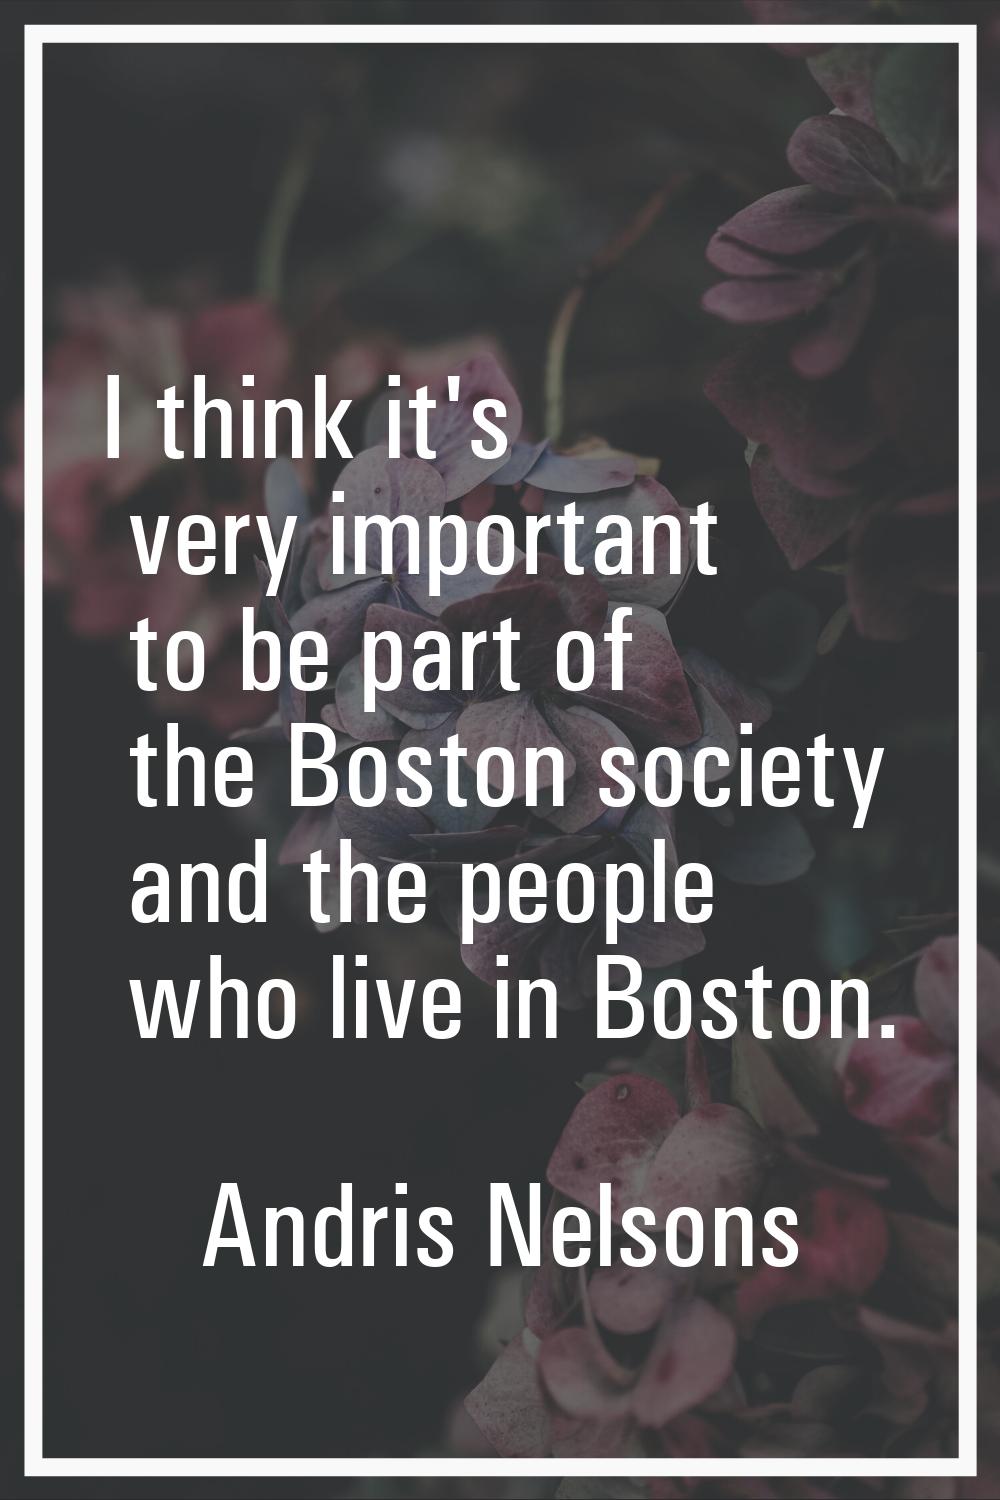 I think it's very important to be part of the Boston society and the people who live in Boston.